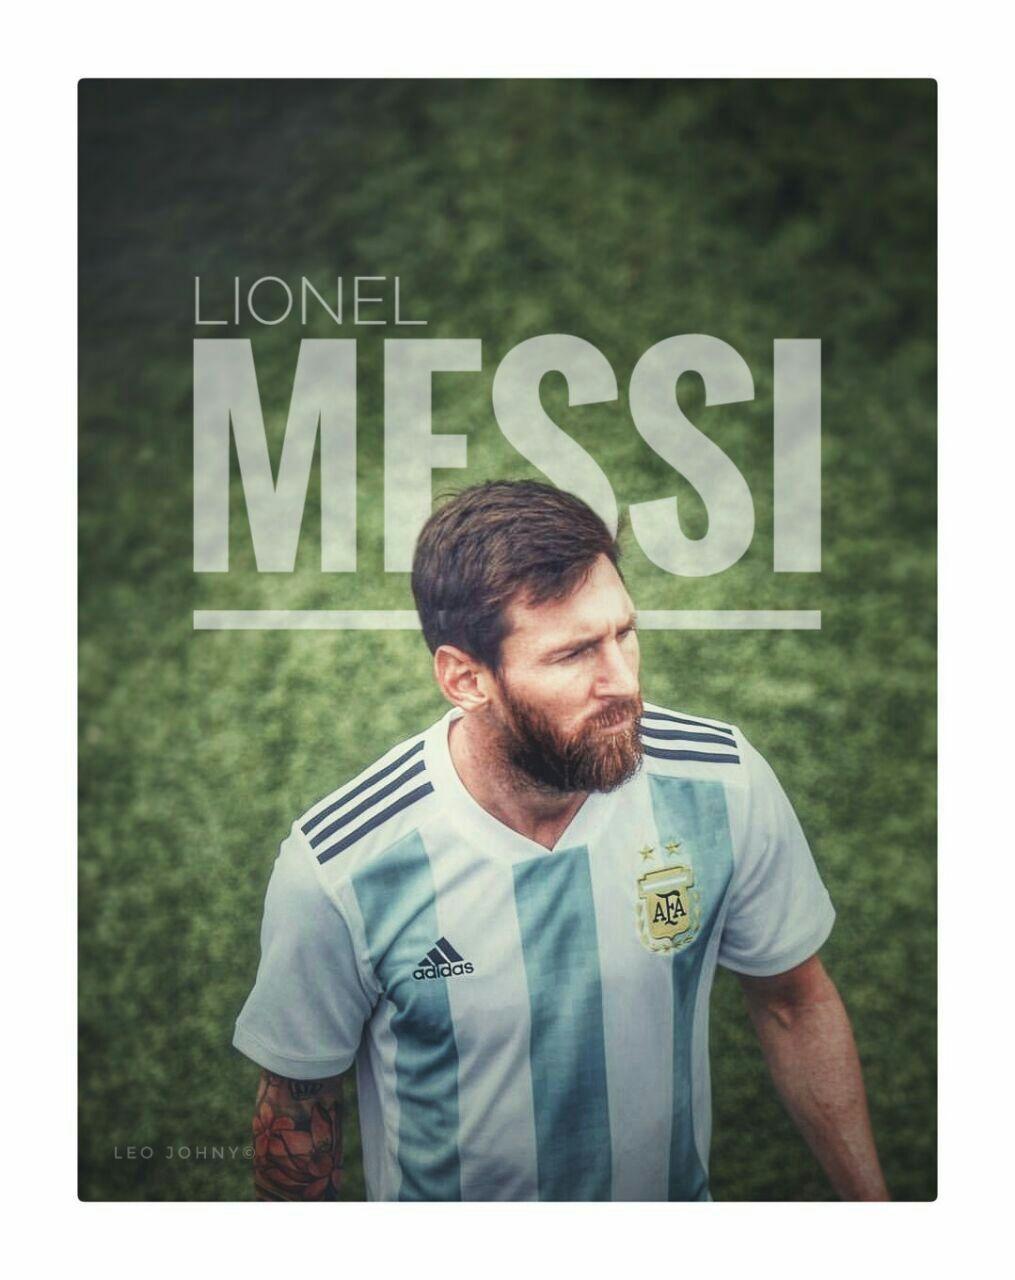 Messi 2018 World Cup Wallpapers - Wallpaper Cave